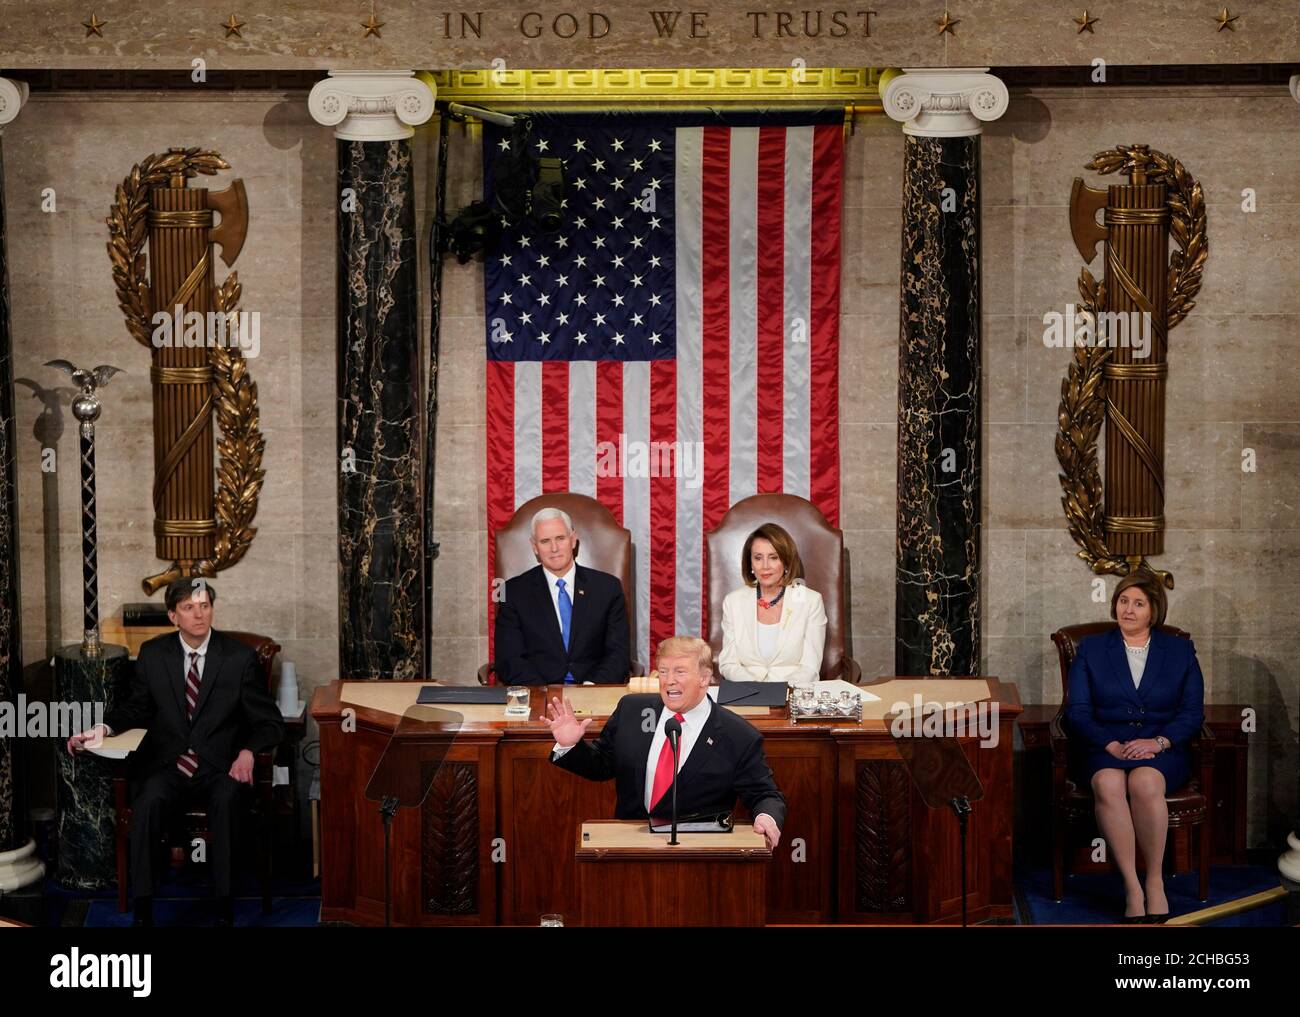 U.S. President Donald Trump delivers his second State of the Union address to a joint session of the U.S. Congress in the House Chamber of the U.S. Capitol on Capitol Hill in Washington, U.S. February 5, 2019. REUTERS/Joshua Roberts Stock Photo